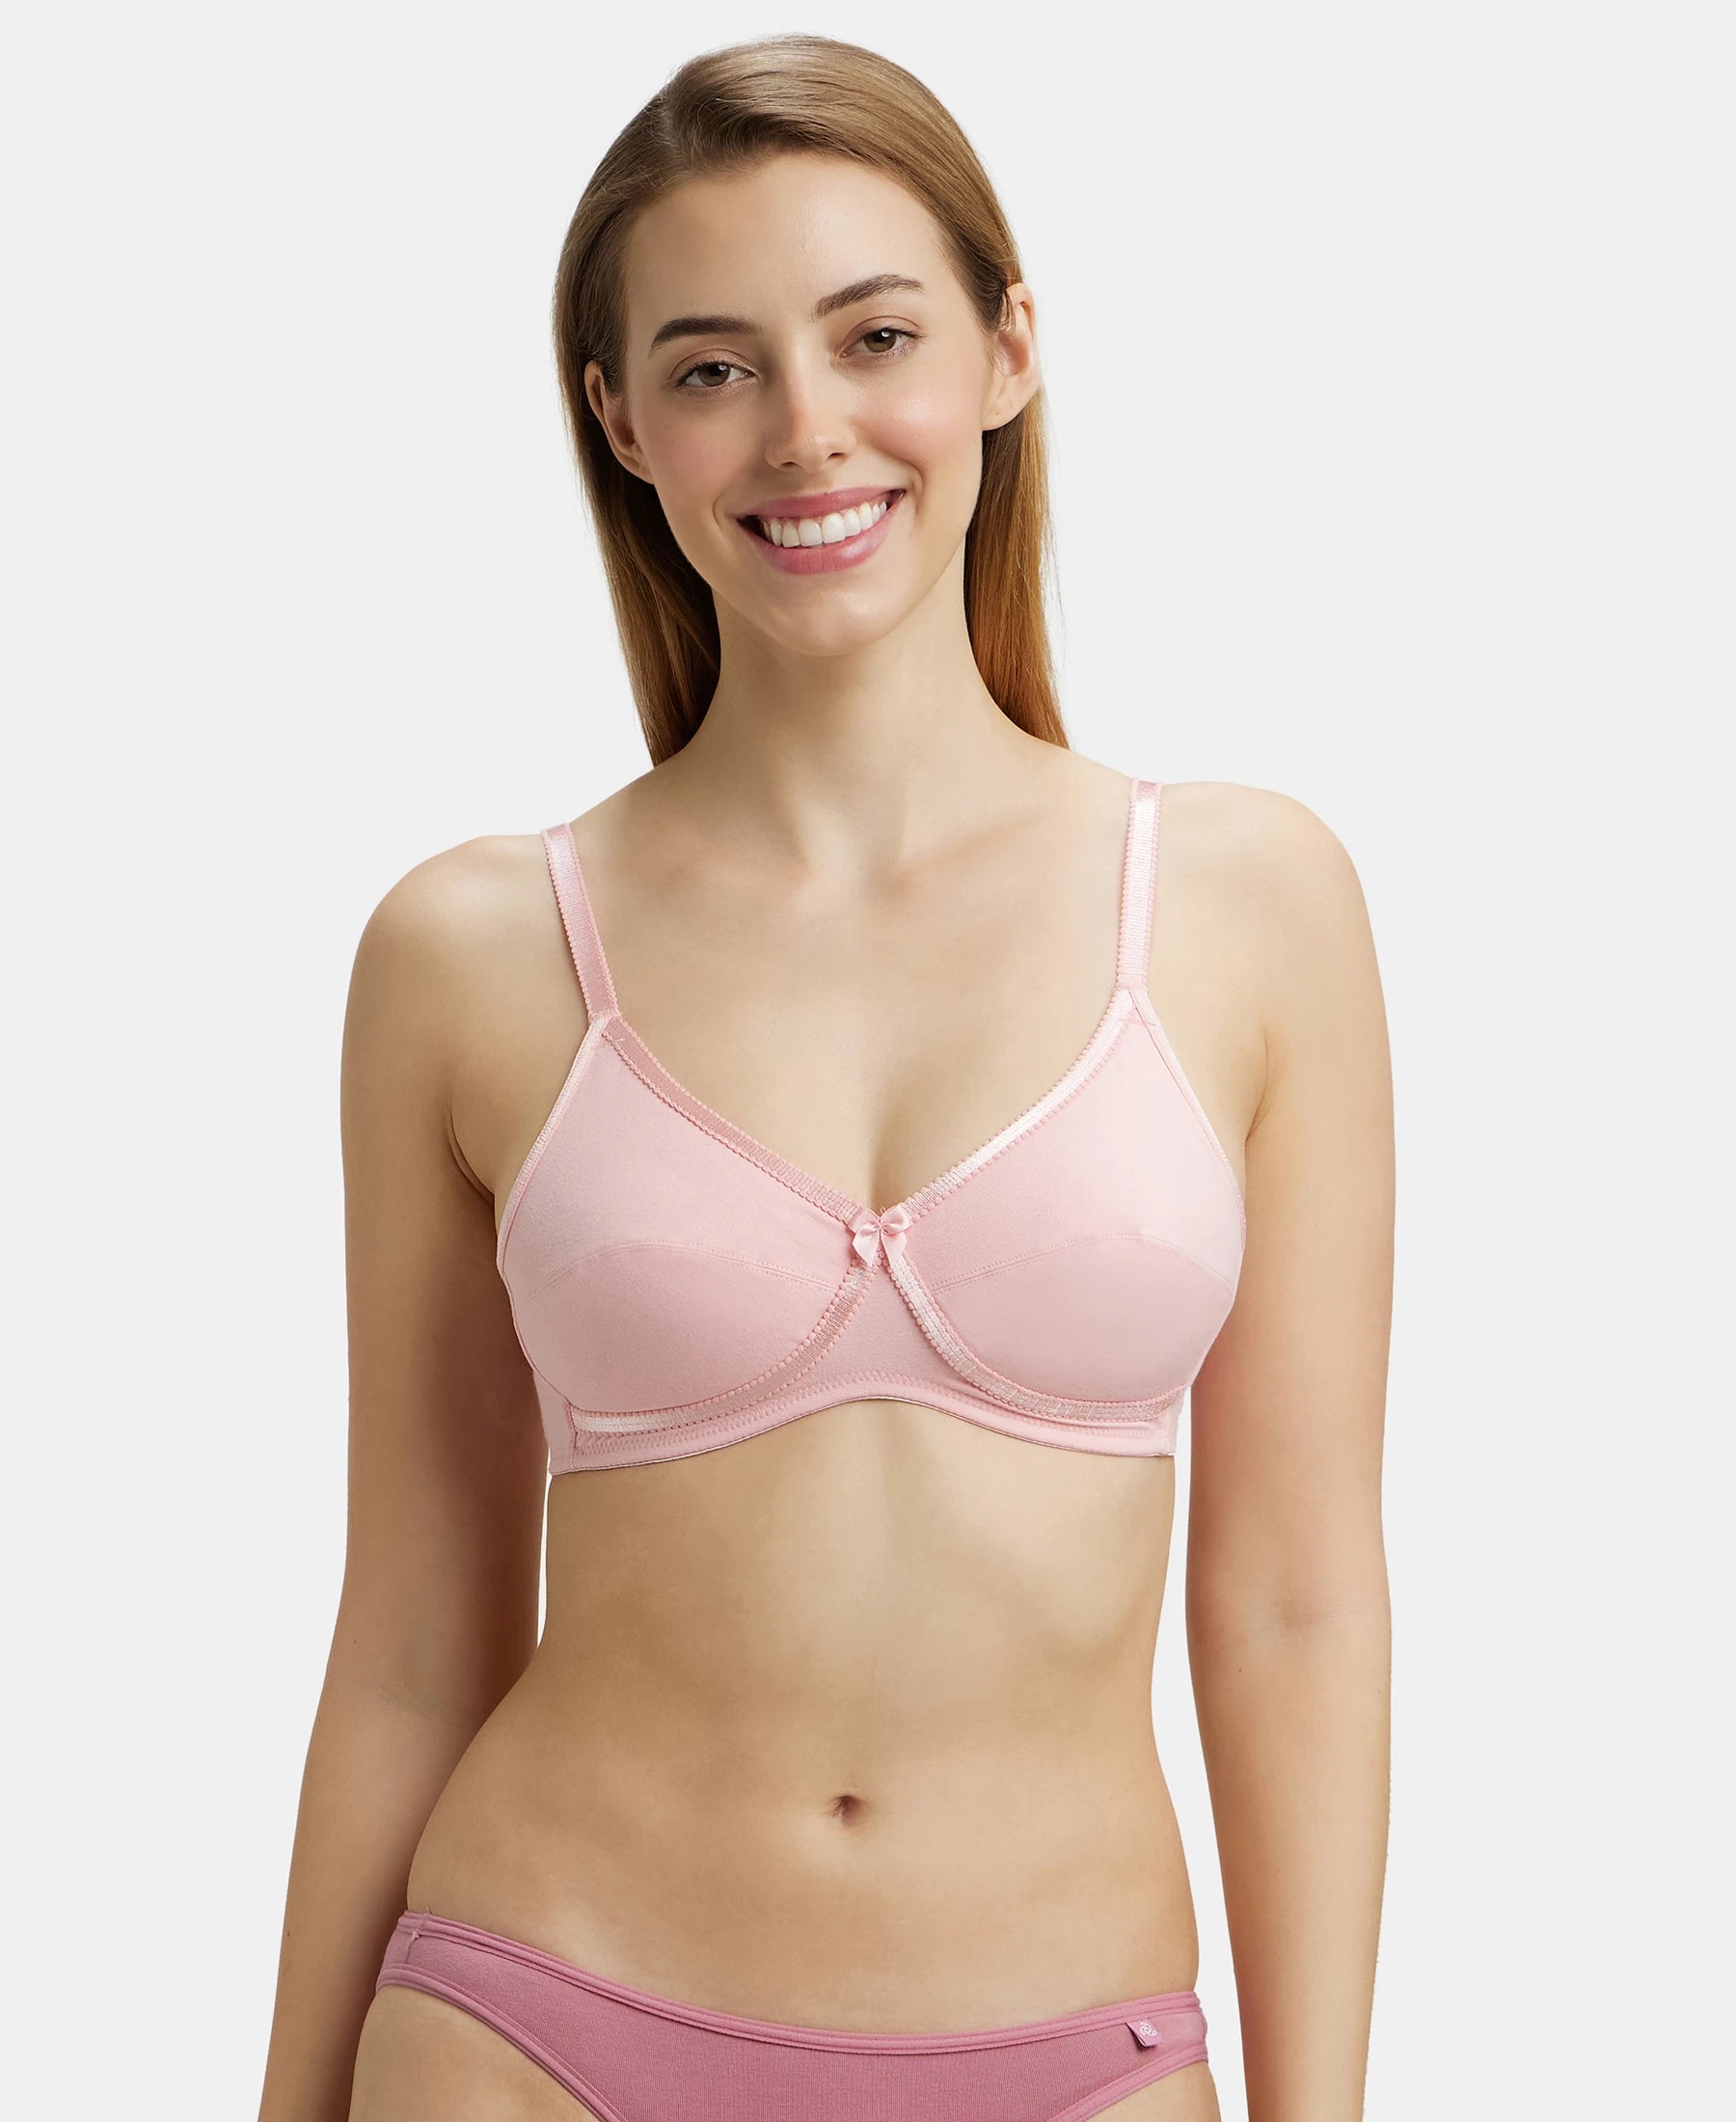 DOLINO® Lifestyle Cotton Bra Non Padded and Non Wired Bra for